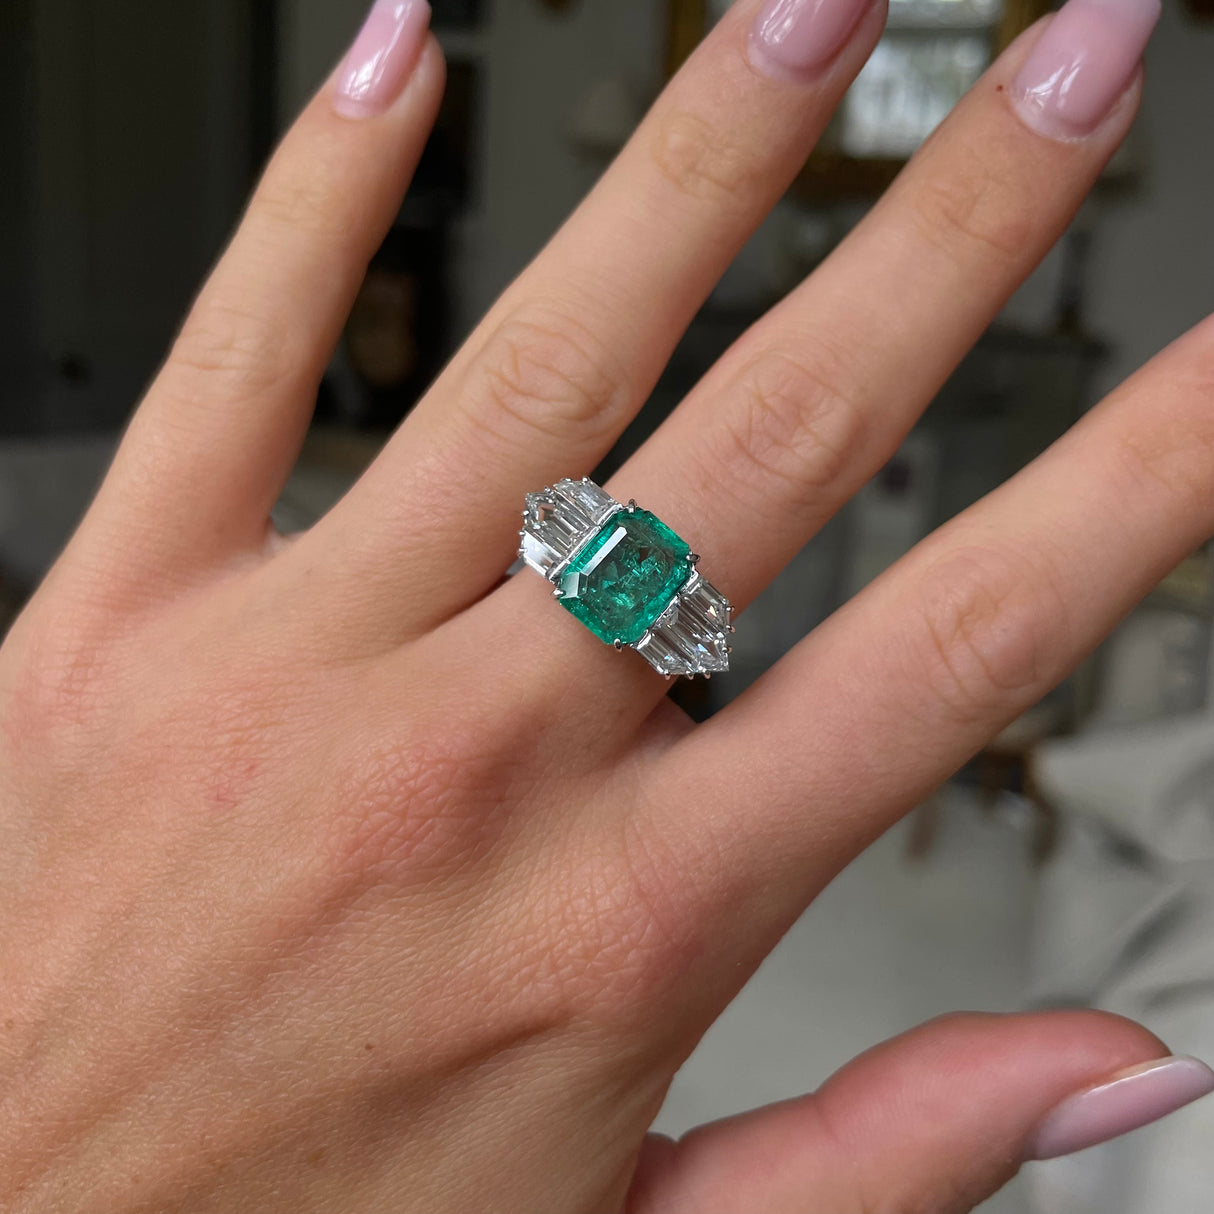 Vintage emerald and diamond engagement ring, worn on hand.